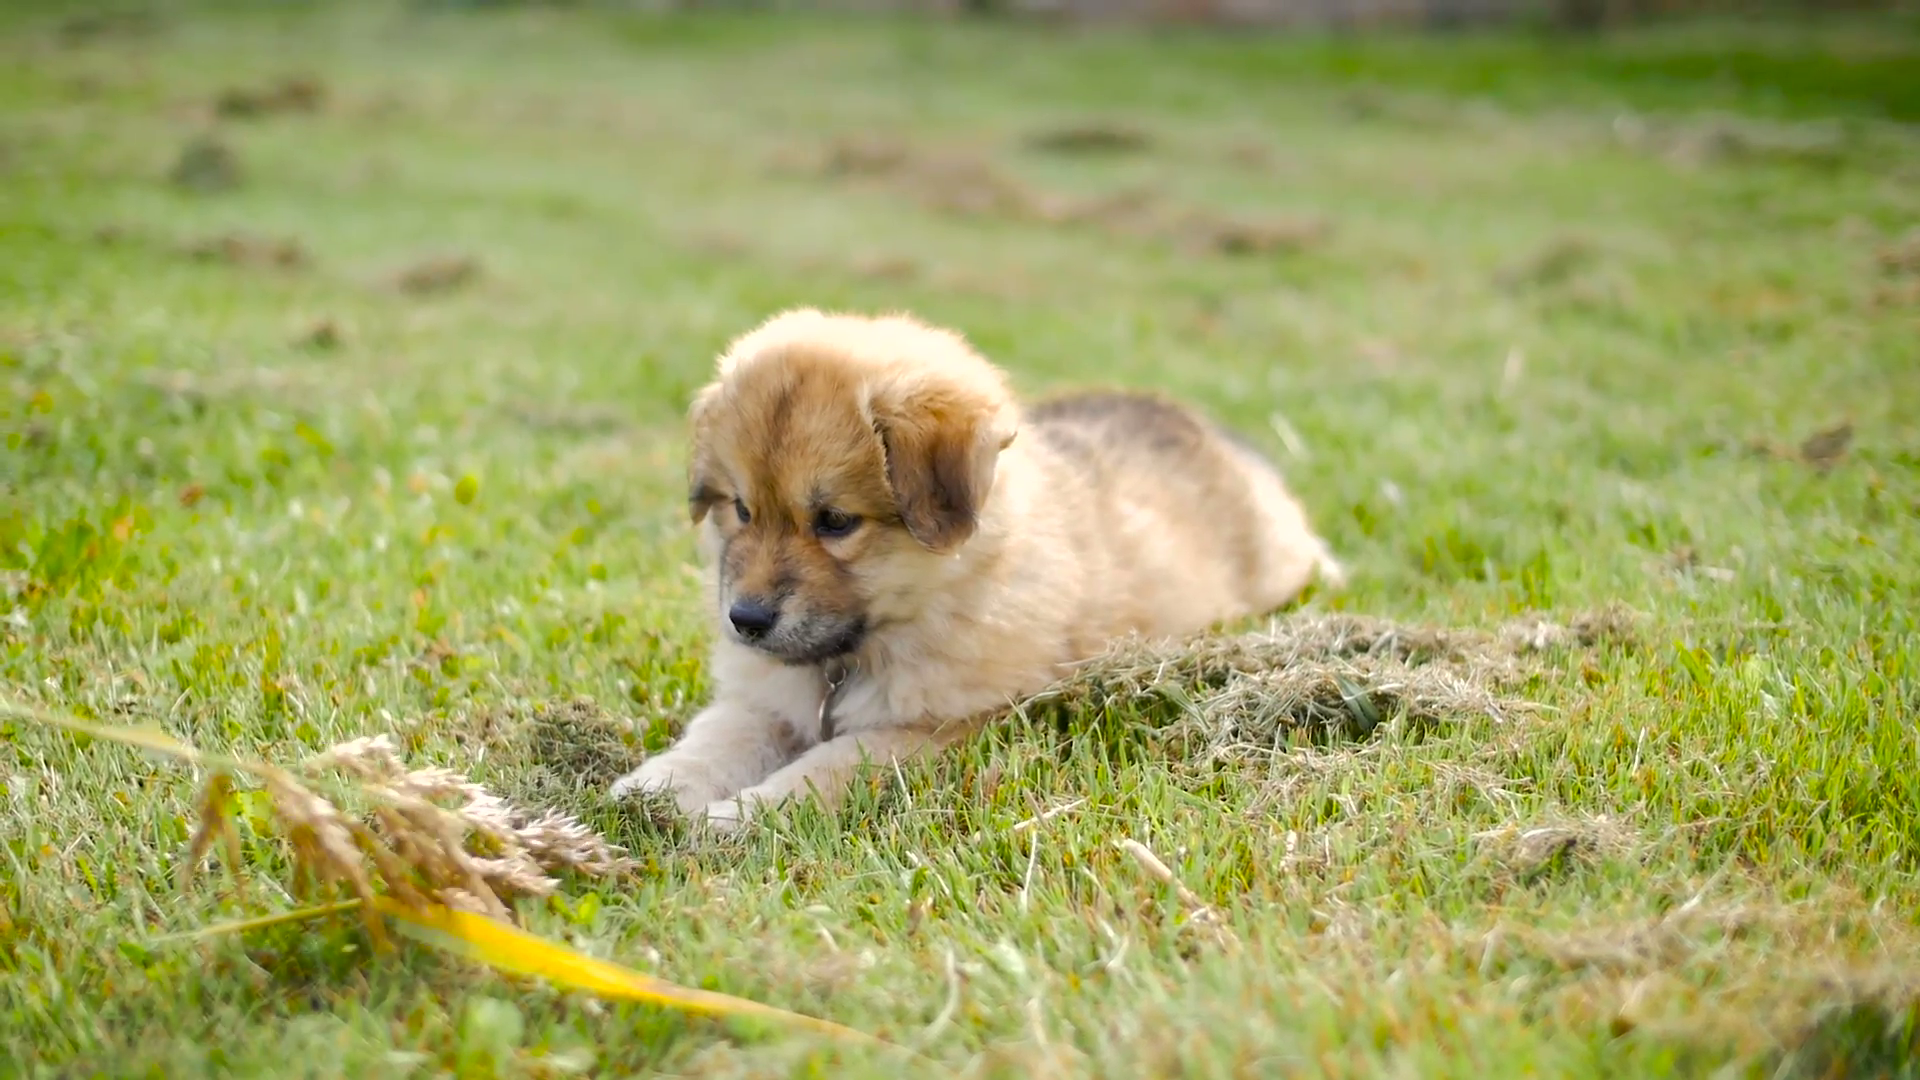 Adorable Puppy Dog Outside On Grass Running And Playing Stock Video ...